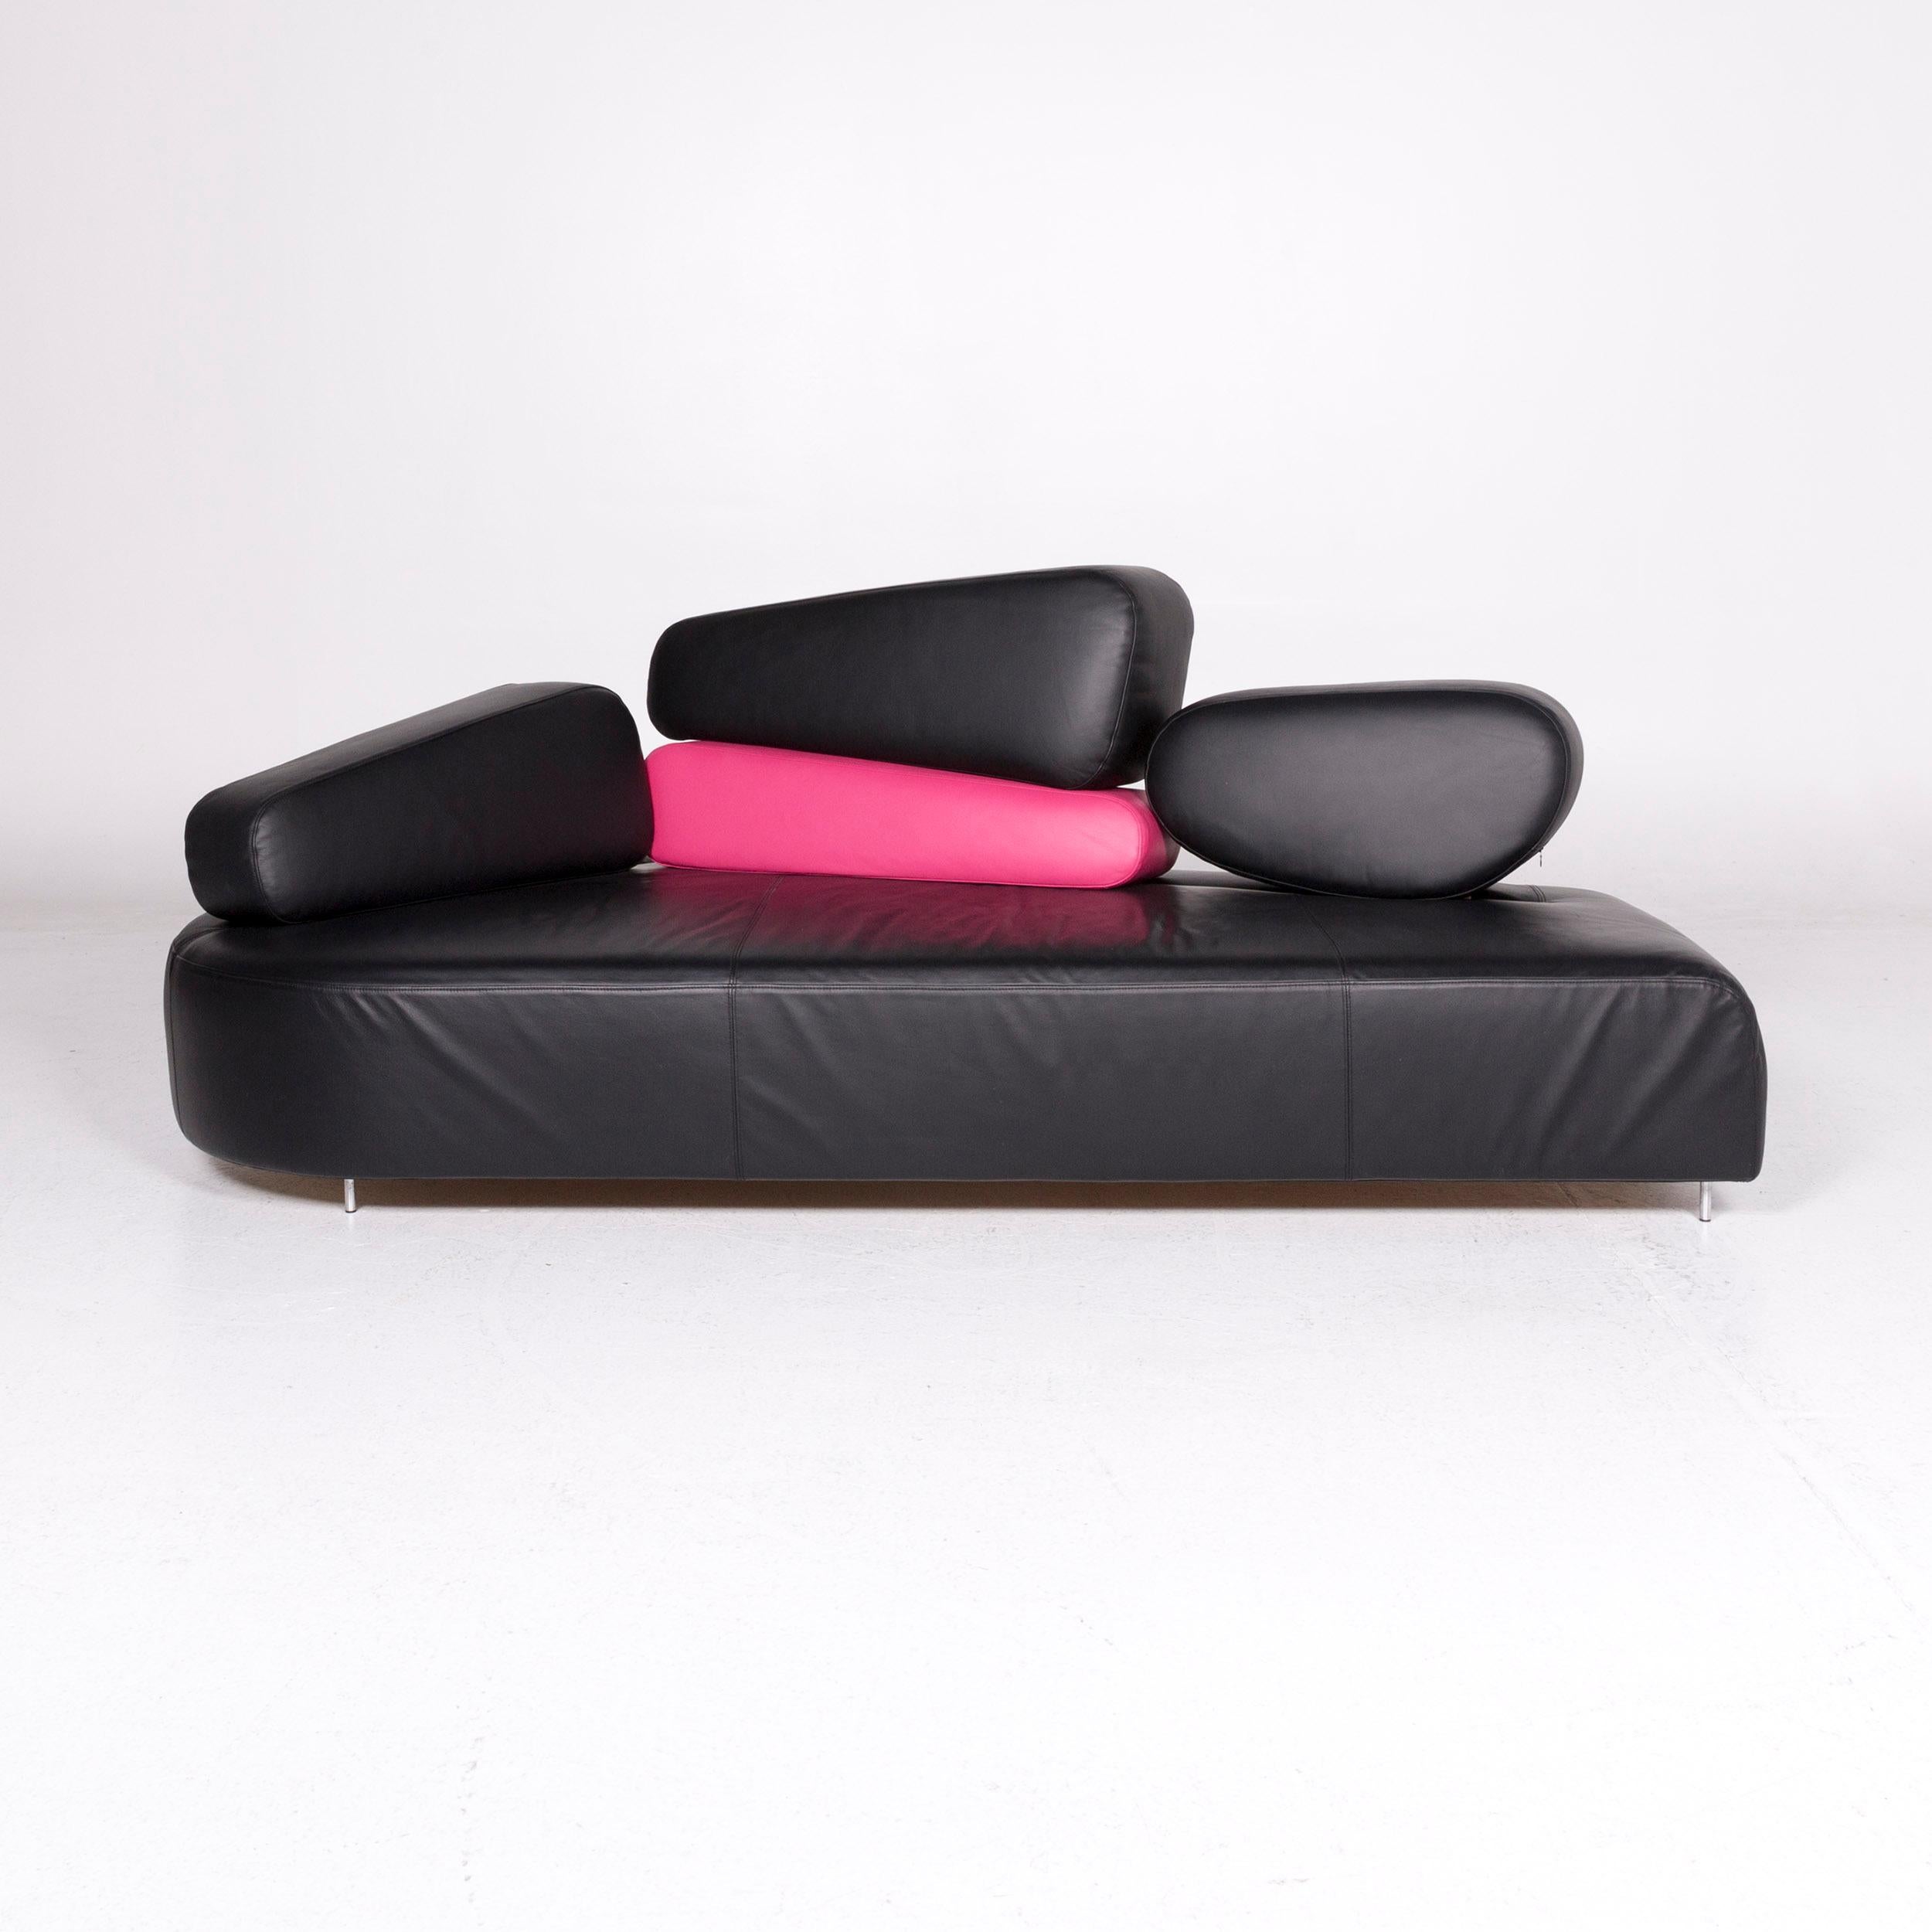 We bring to you a Brühl & Sippold Mosspink leather sofa incl. stool black pink three-seat Kati.
 
Product measurements in centimeters:
 
Depth 122
Width 225
Height 96
Seat-height 37
Rest-height 61
Seat-depth 72
Seat-width 199
Back-height